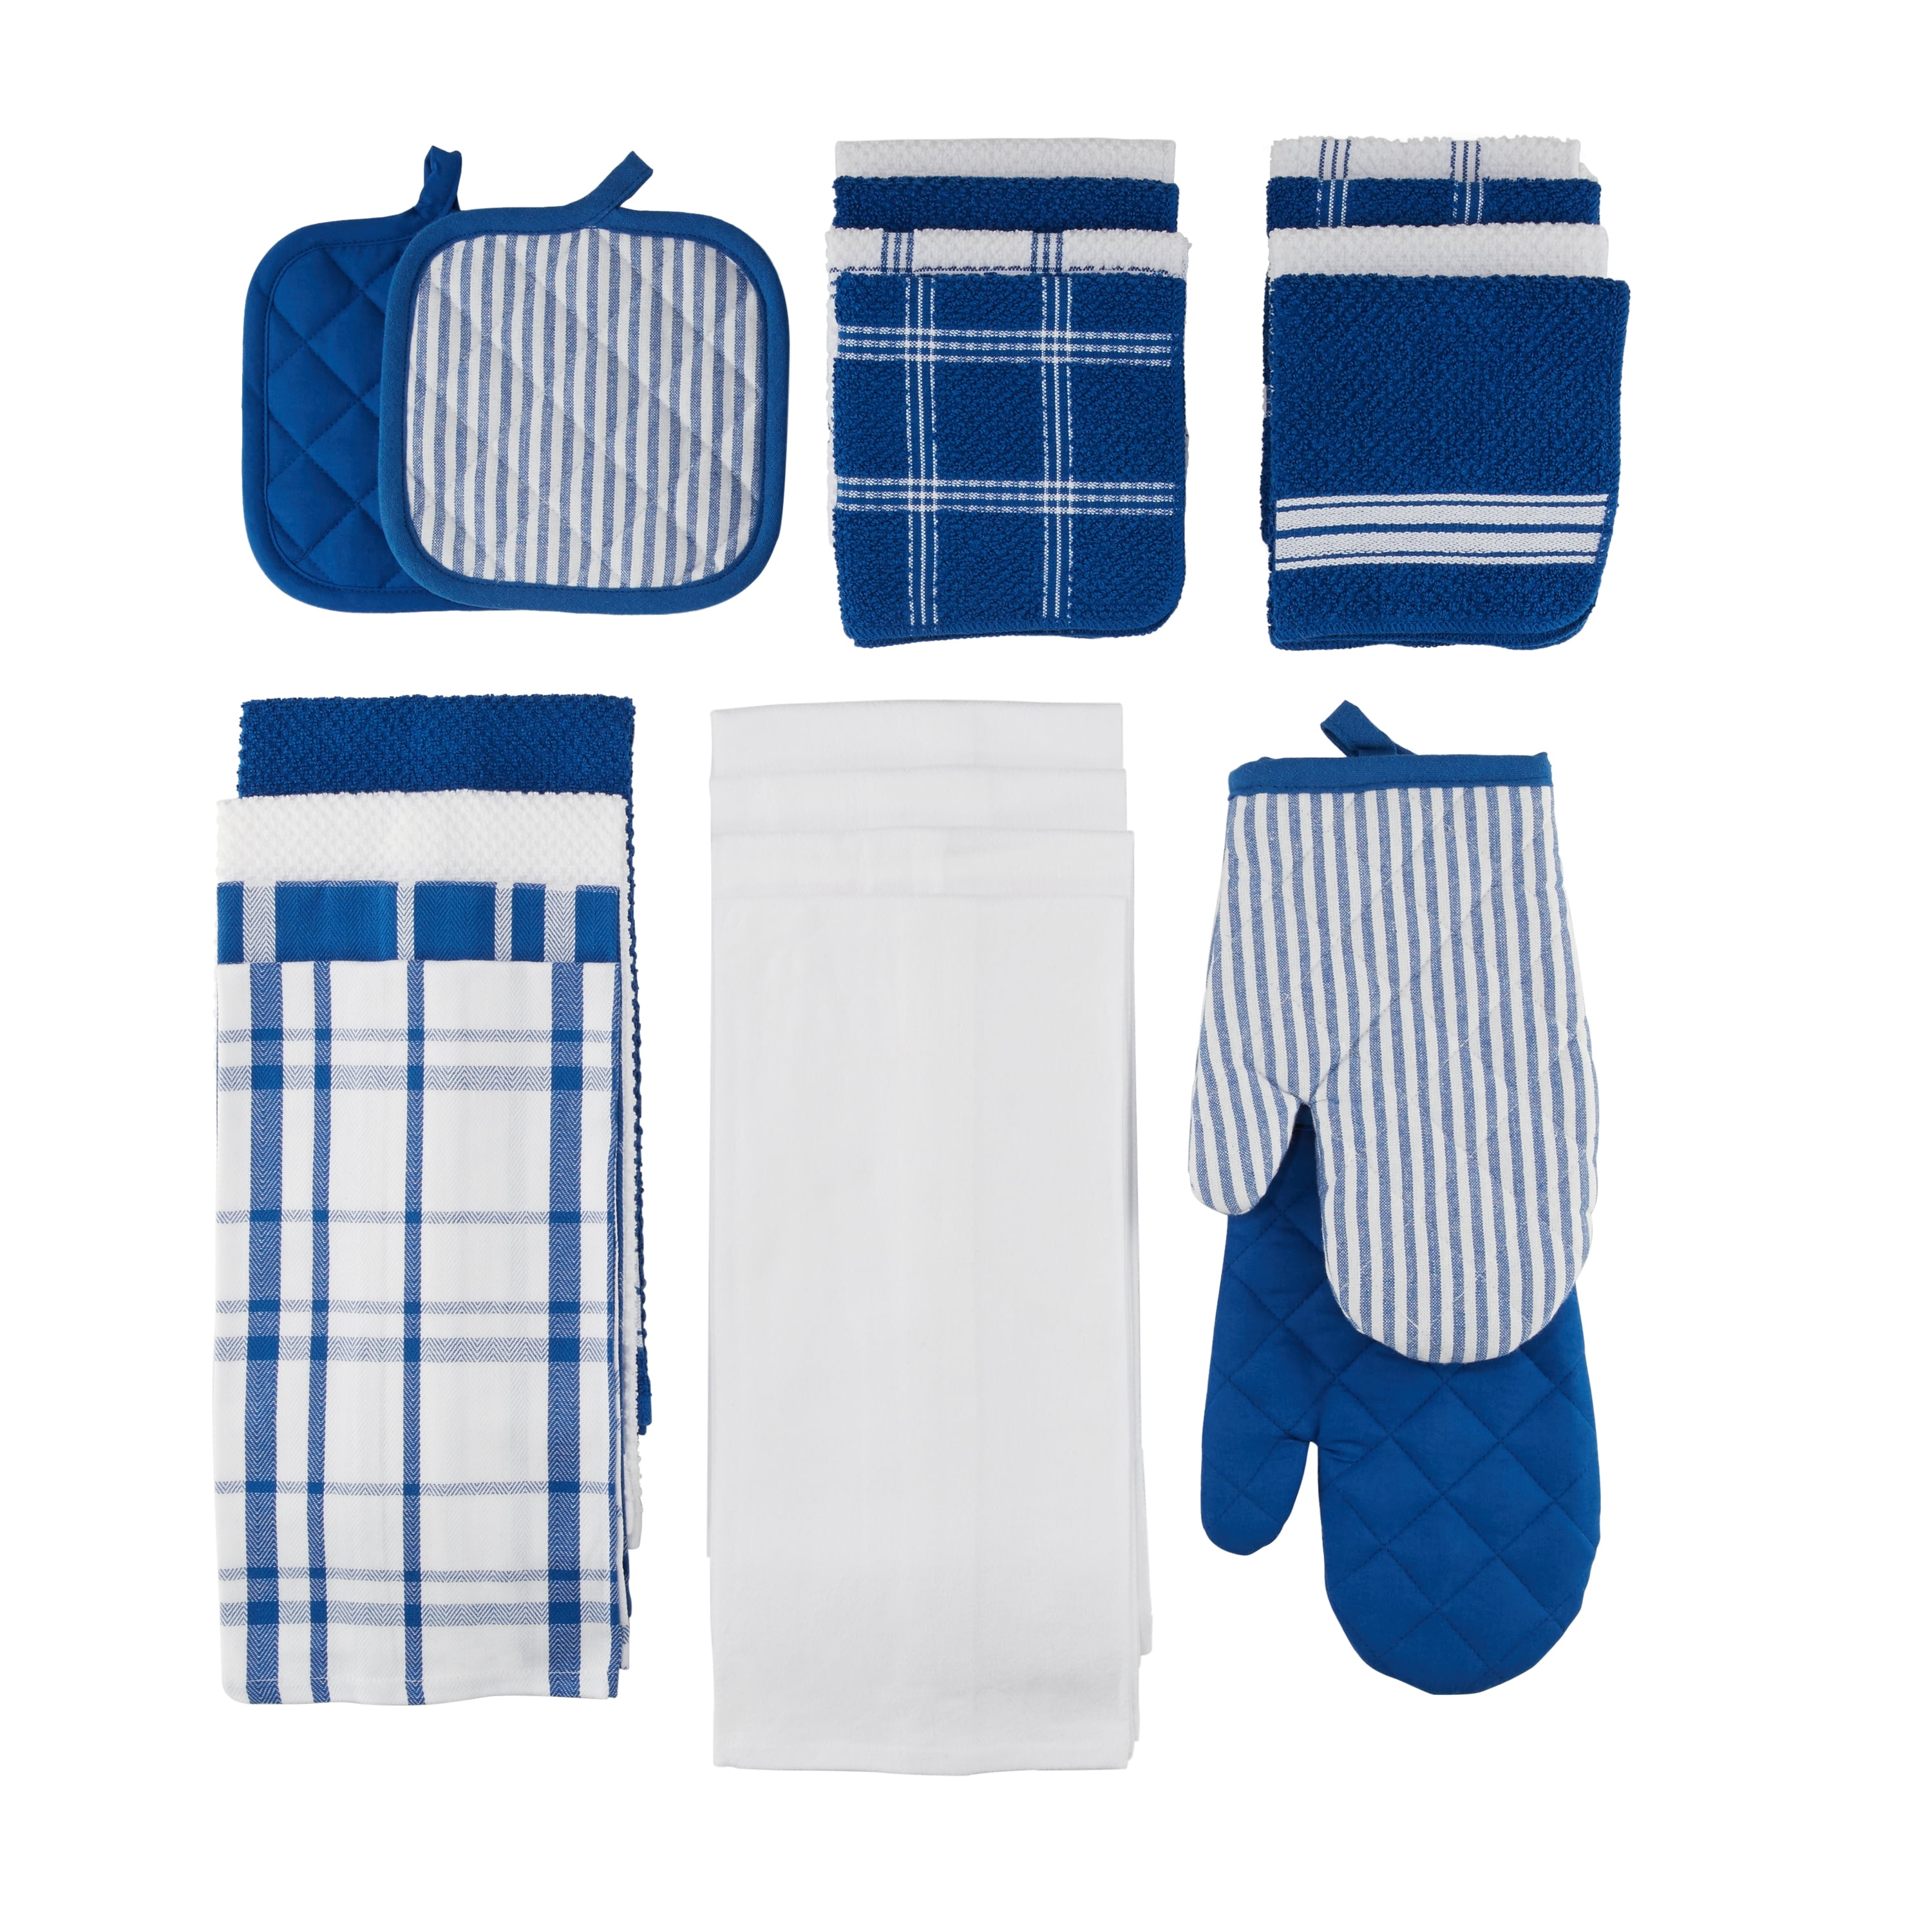 The Weaver's Blend Set of 3 Kitchen Towels + 3 Dish Cloths, Basket Weave,  100% Cotton, Absorbent, Size 28”x18” and 12'x12”, Bright Blue Stripe